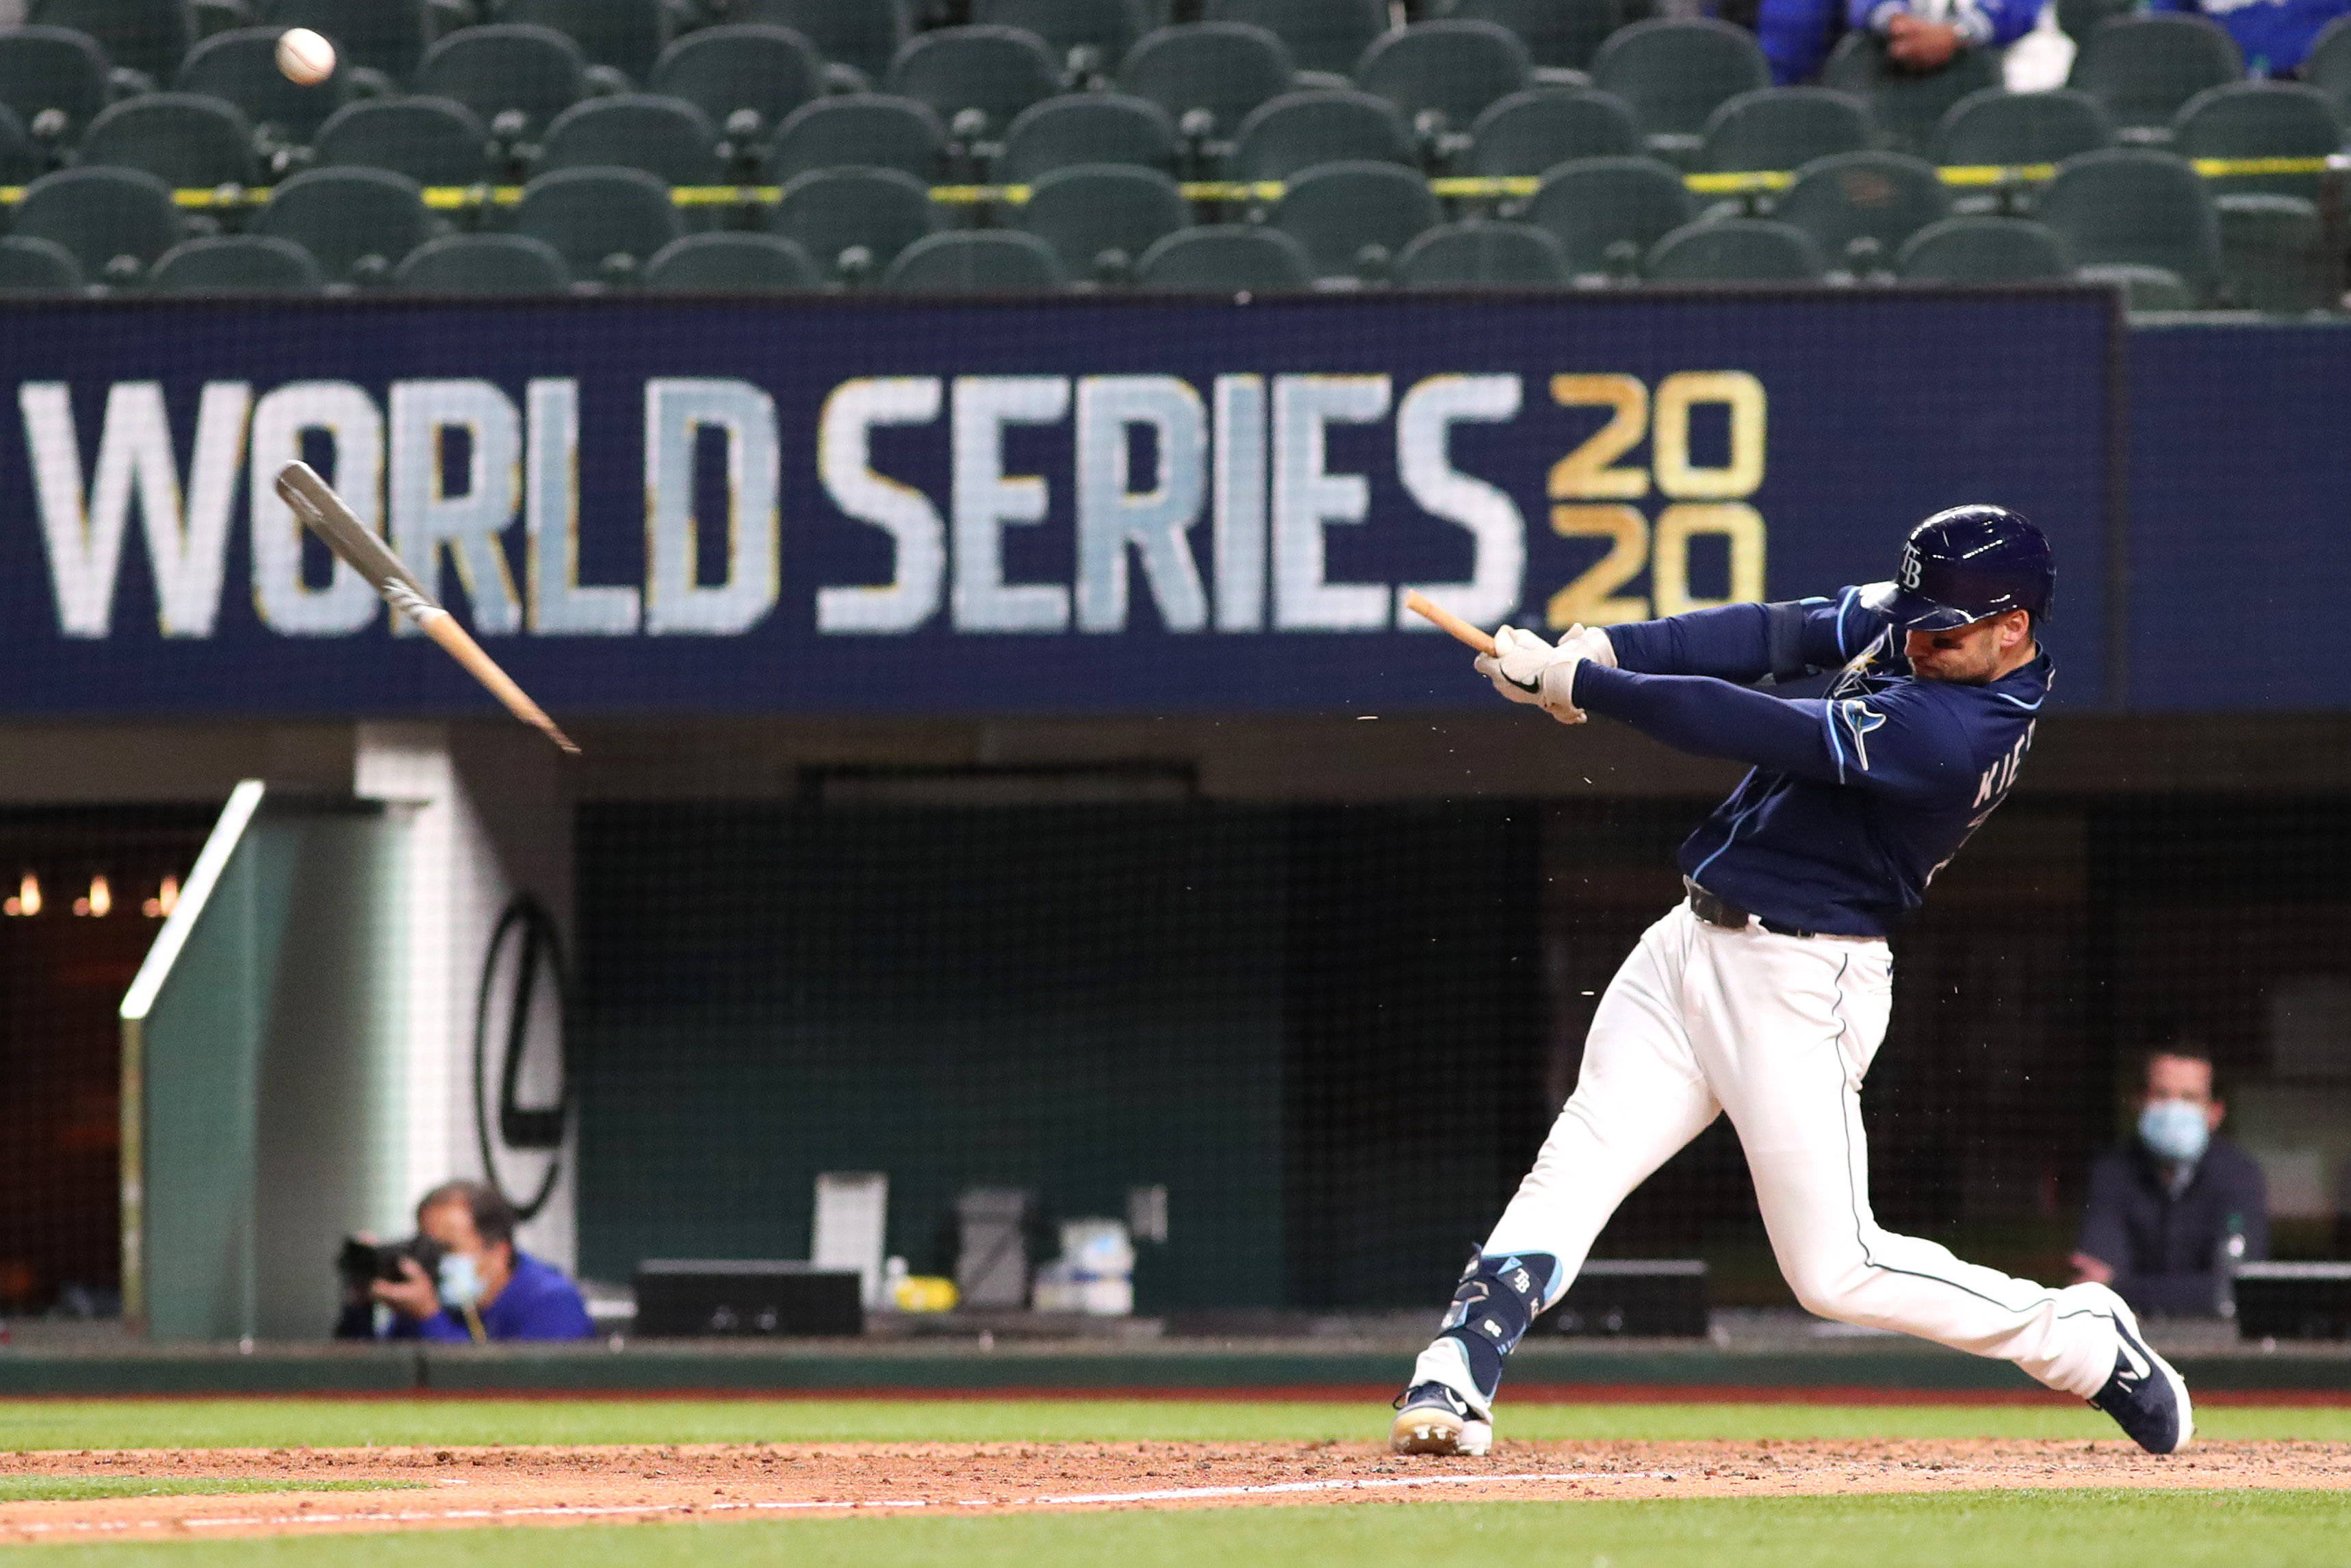 One fatal flaw that will prevent Rays from winning World Series